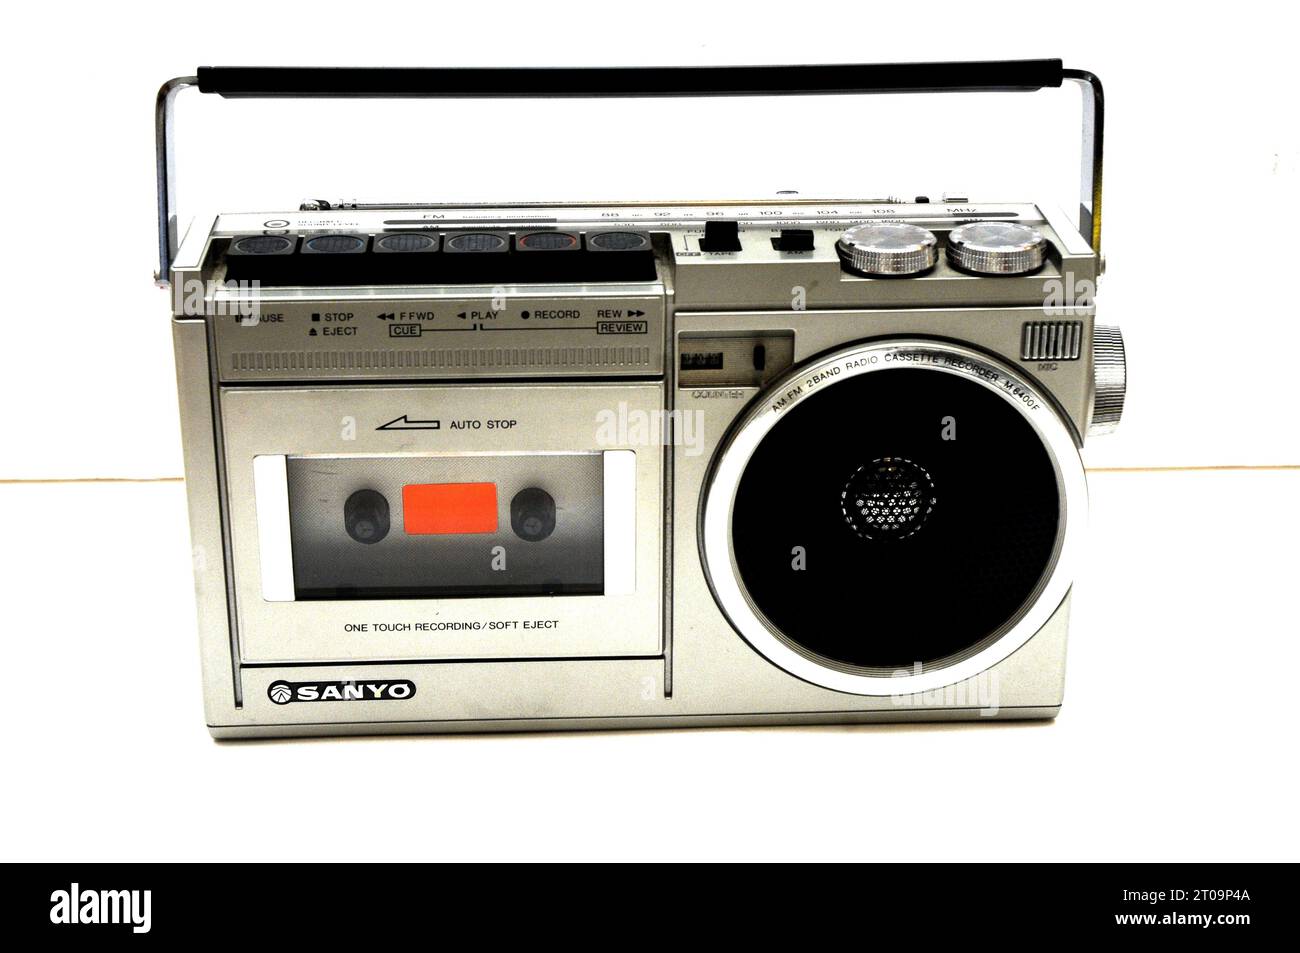 sanyo; cassette; 70s; music device; 70s music player; tape; cassette; Sanyo radio cassette; vintage radio cassette Stock Photo